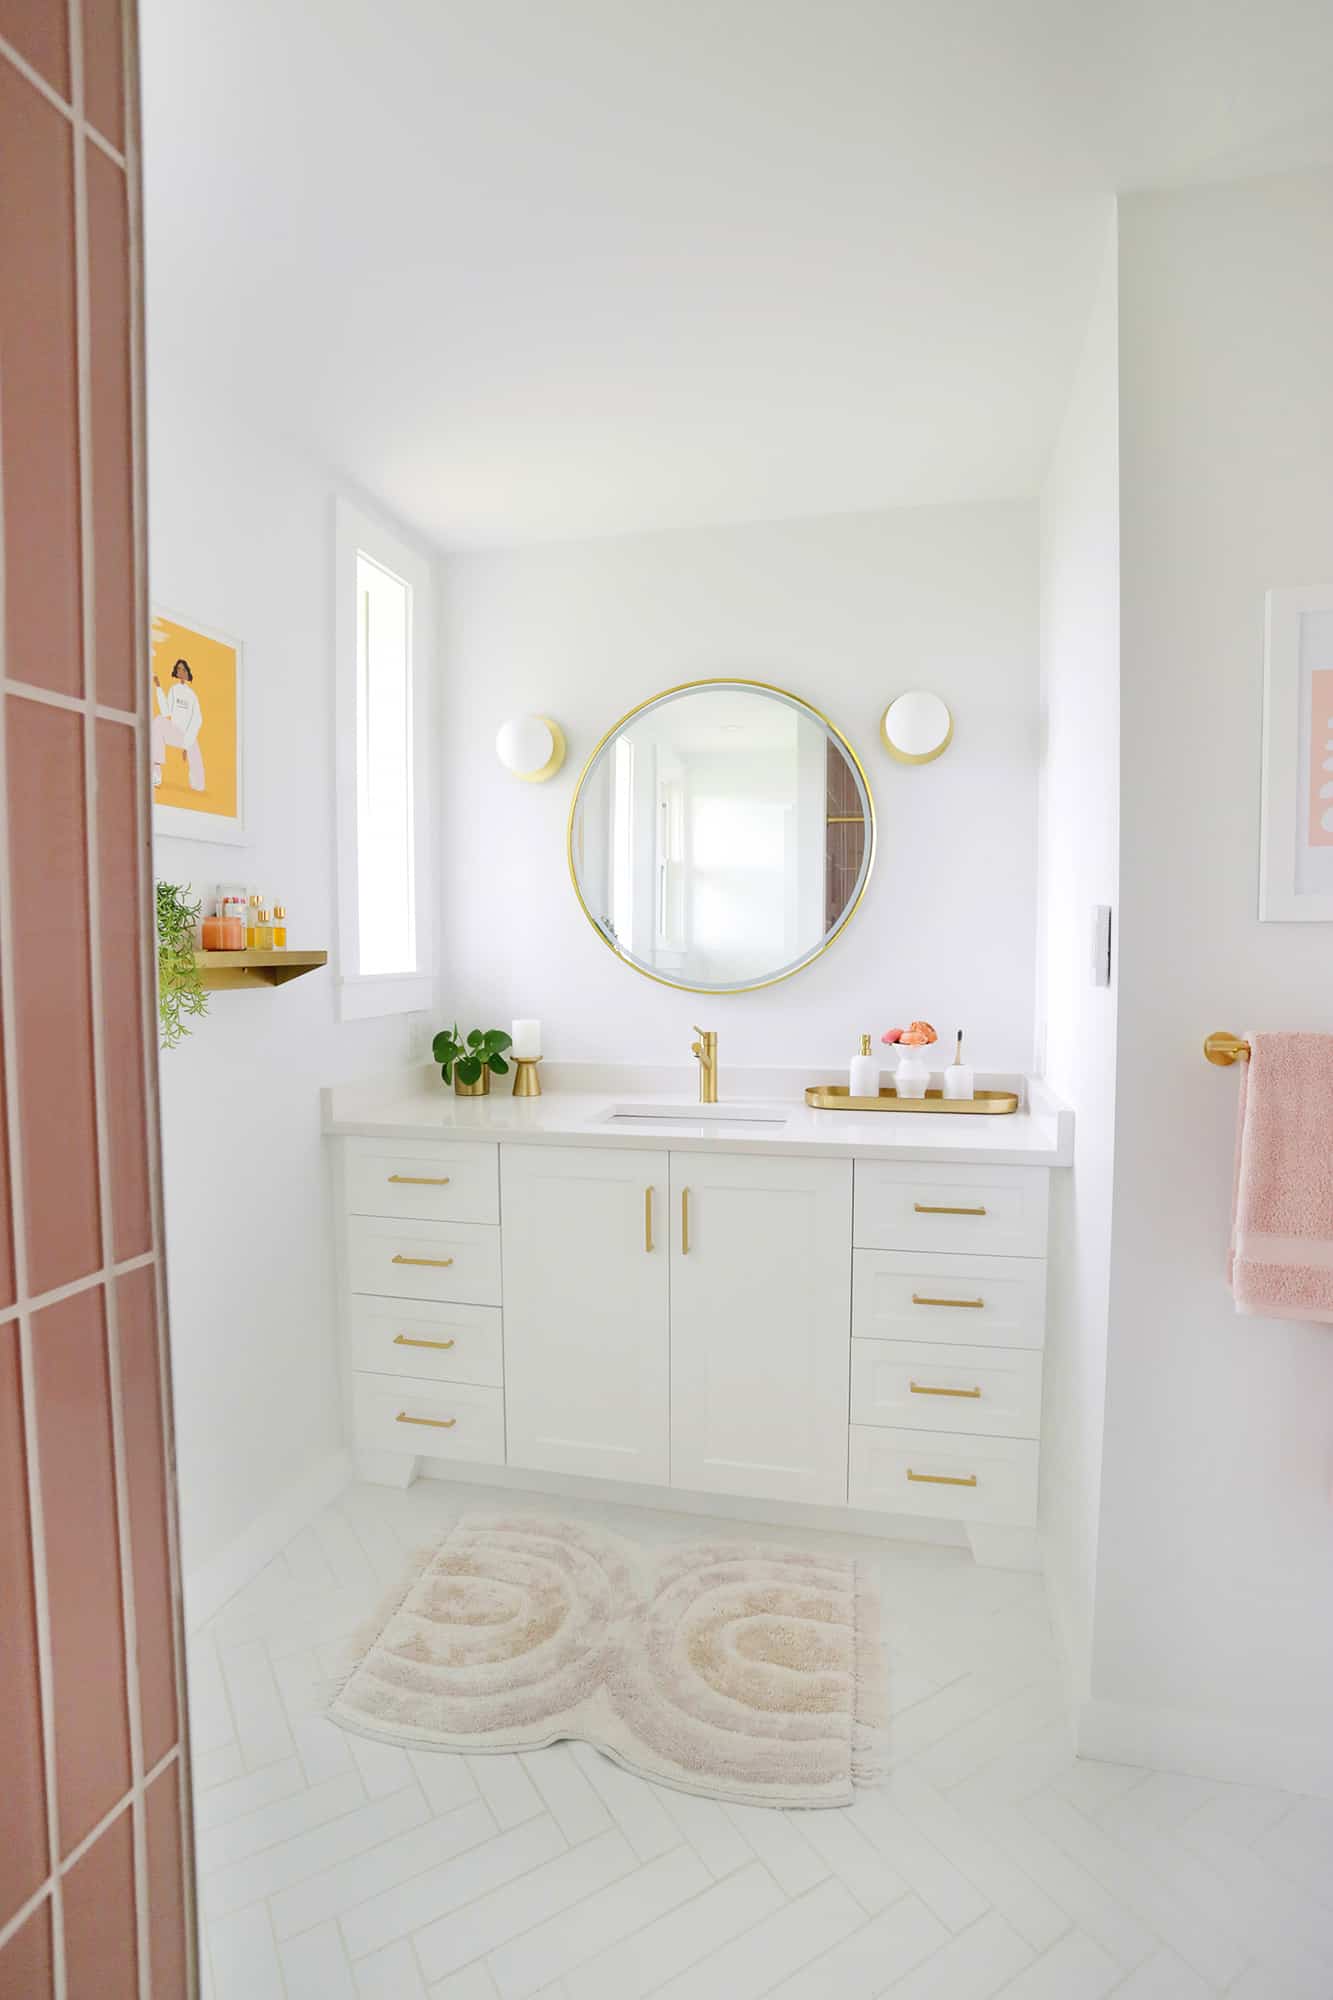 Bright bathroom with gold fixtures